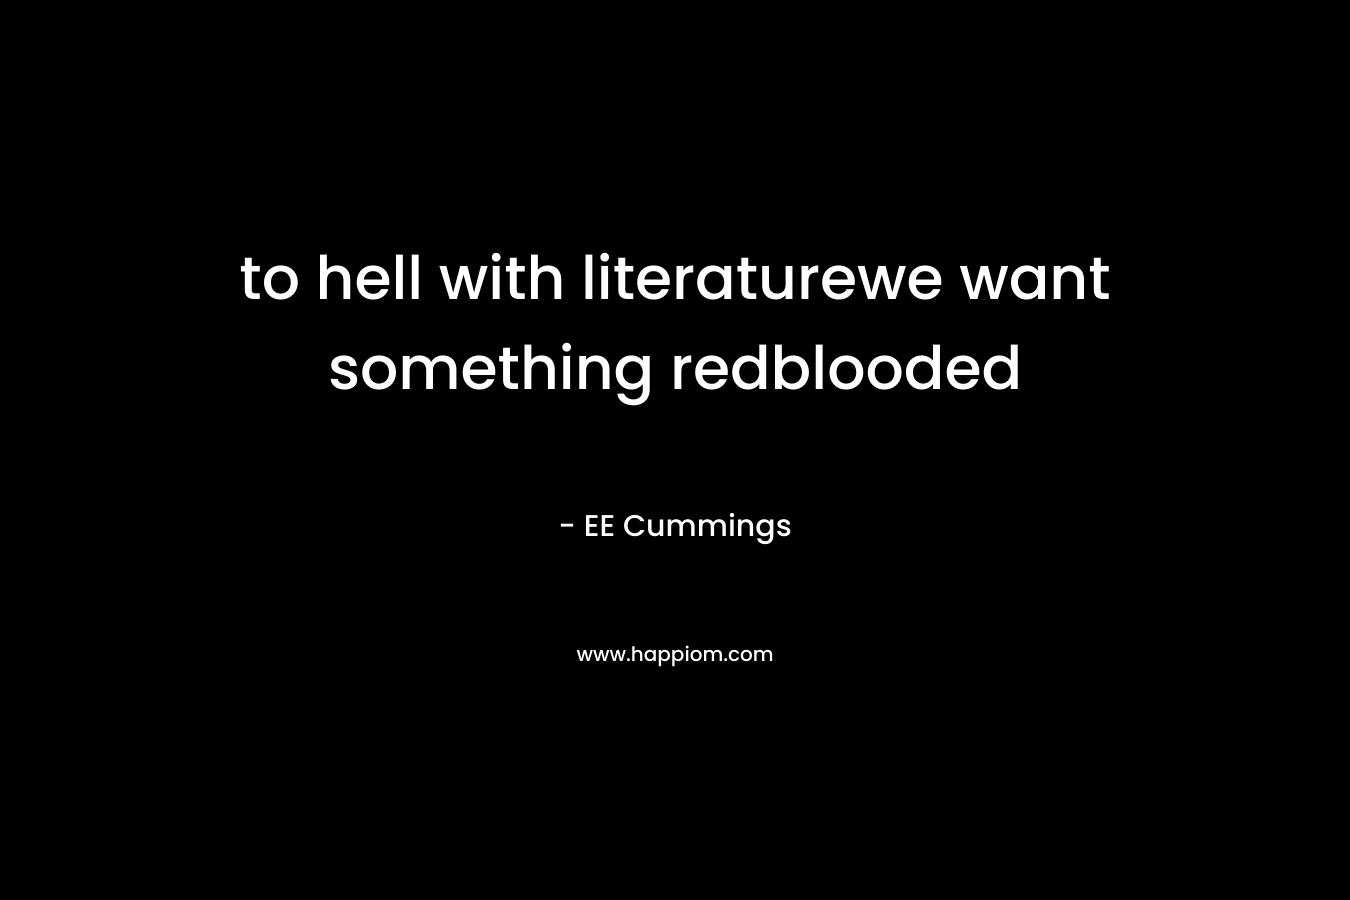 to hell with literaturewe want something redblooded – EE Cummings